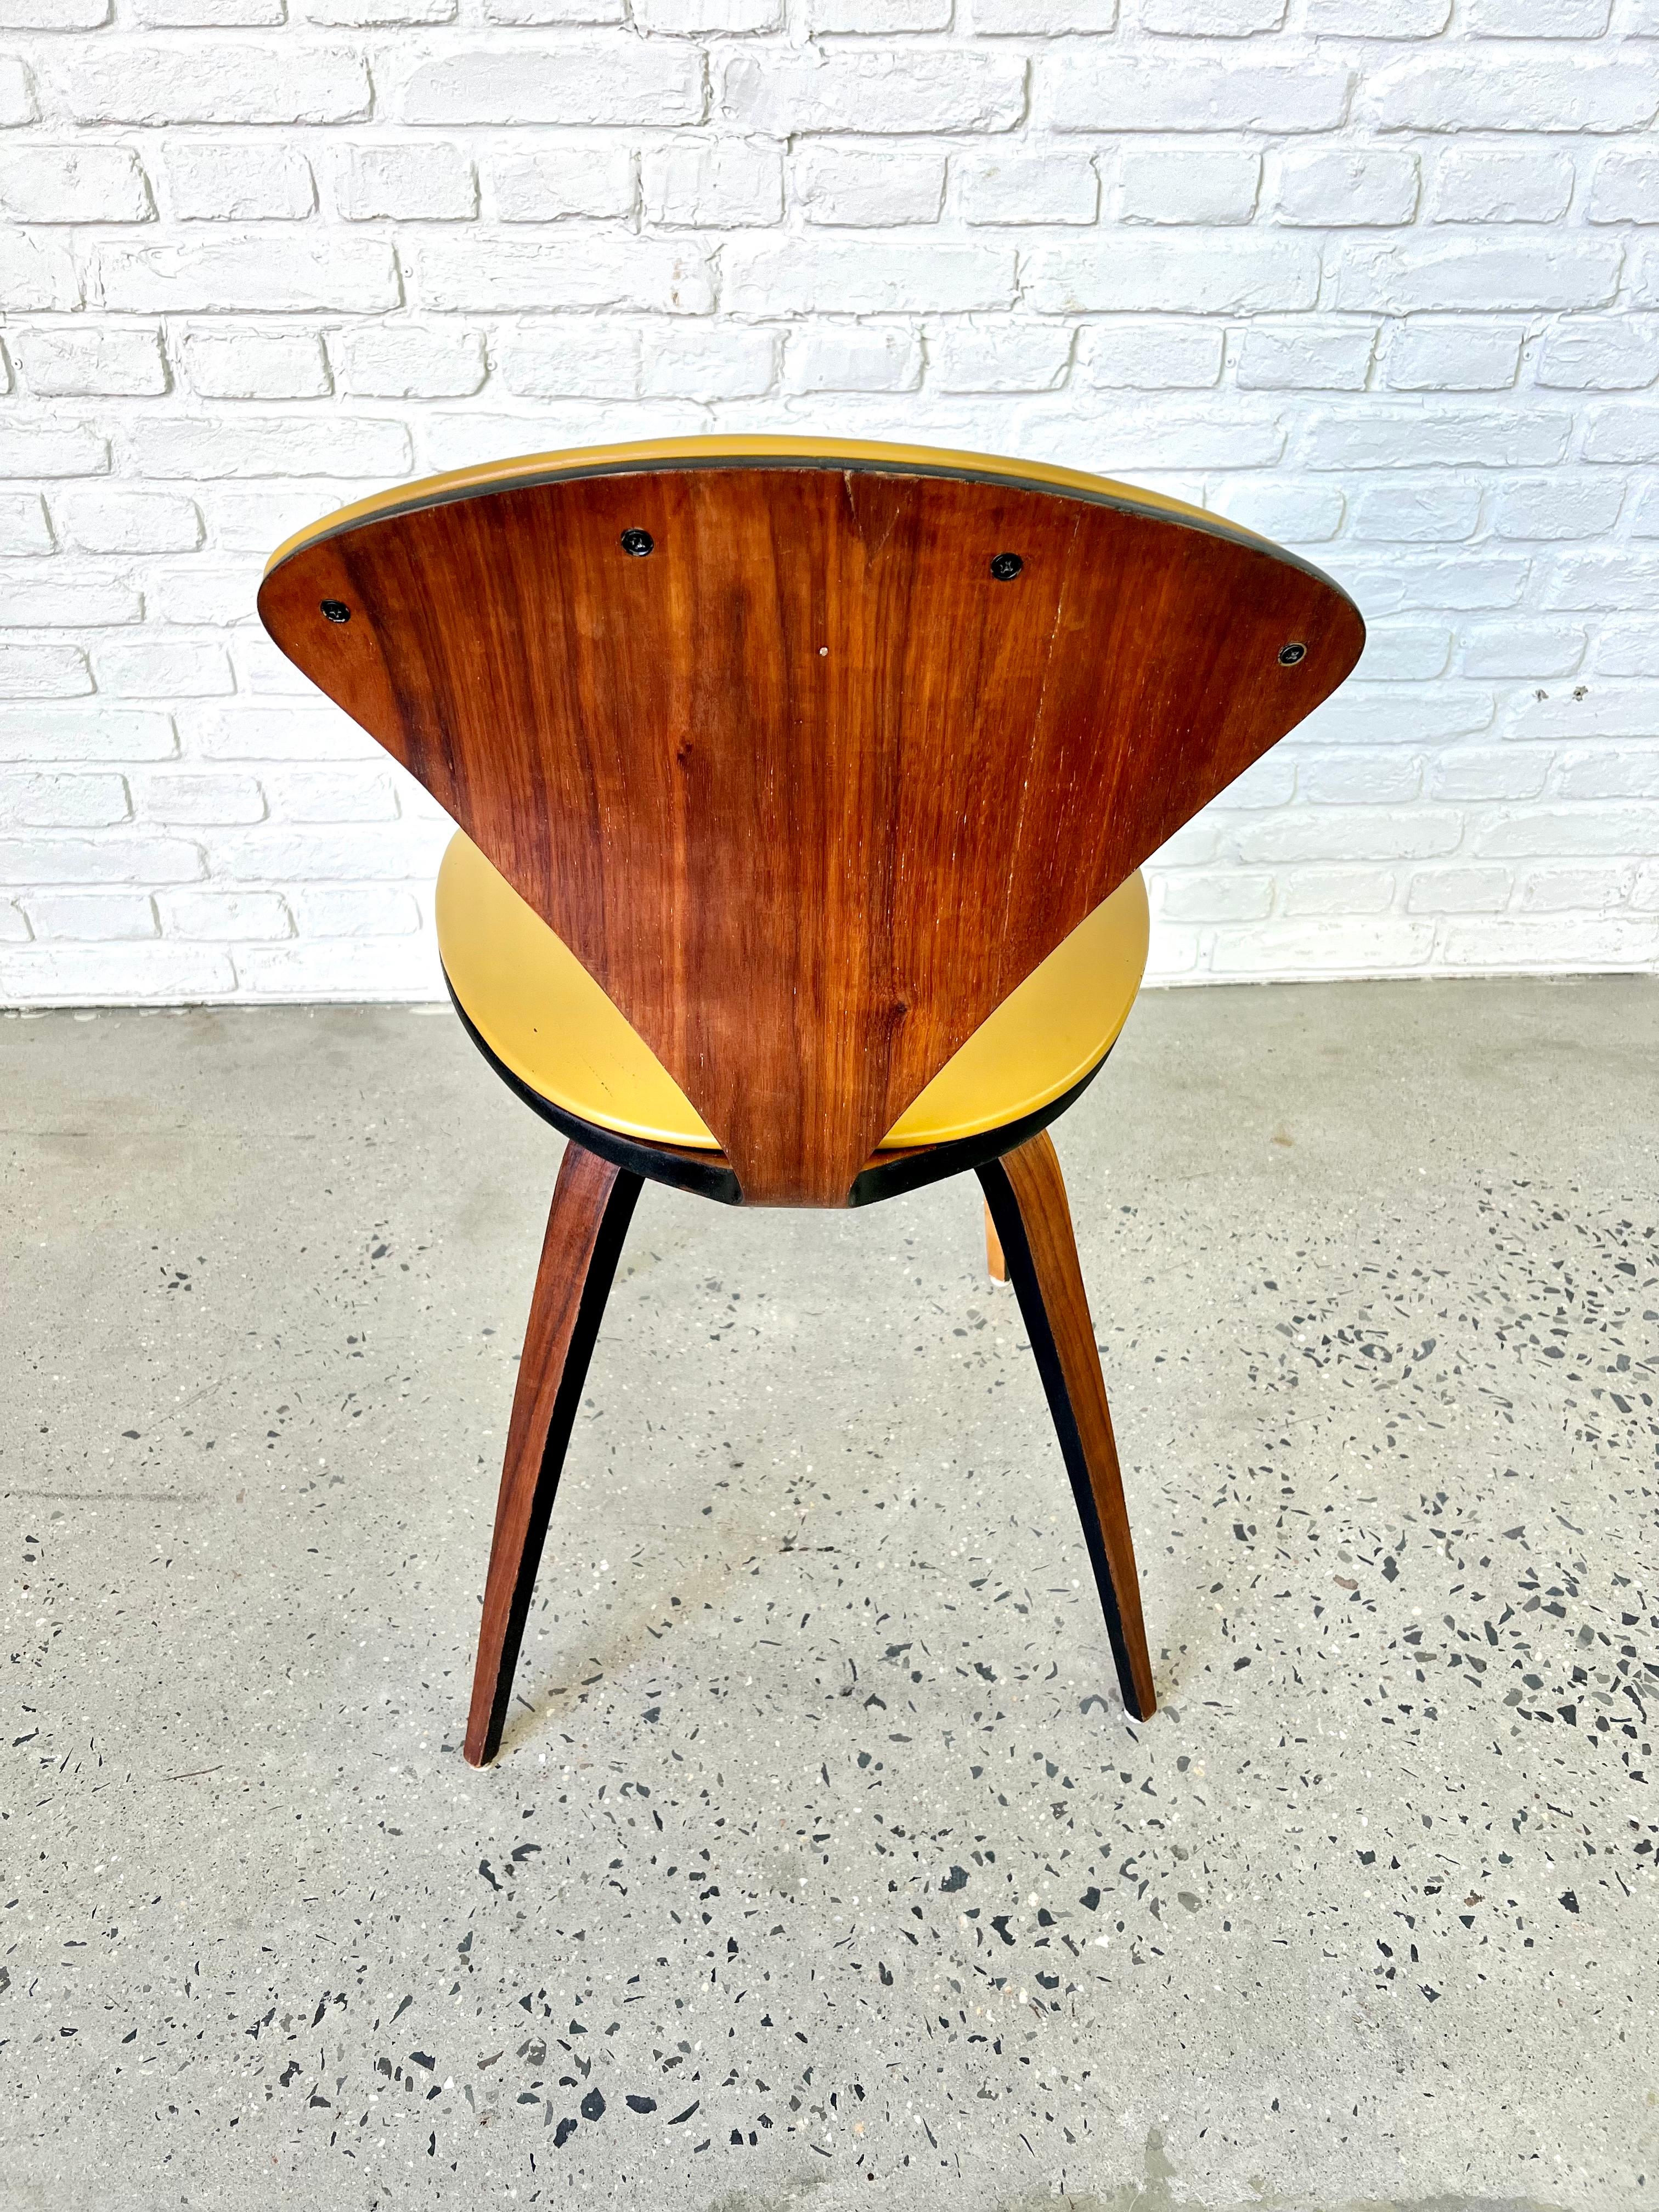 Naugahyde Norman Cherner for Plycraft Bentwood chair with Yellow Vinyl cushion 1960s For Sale